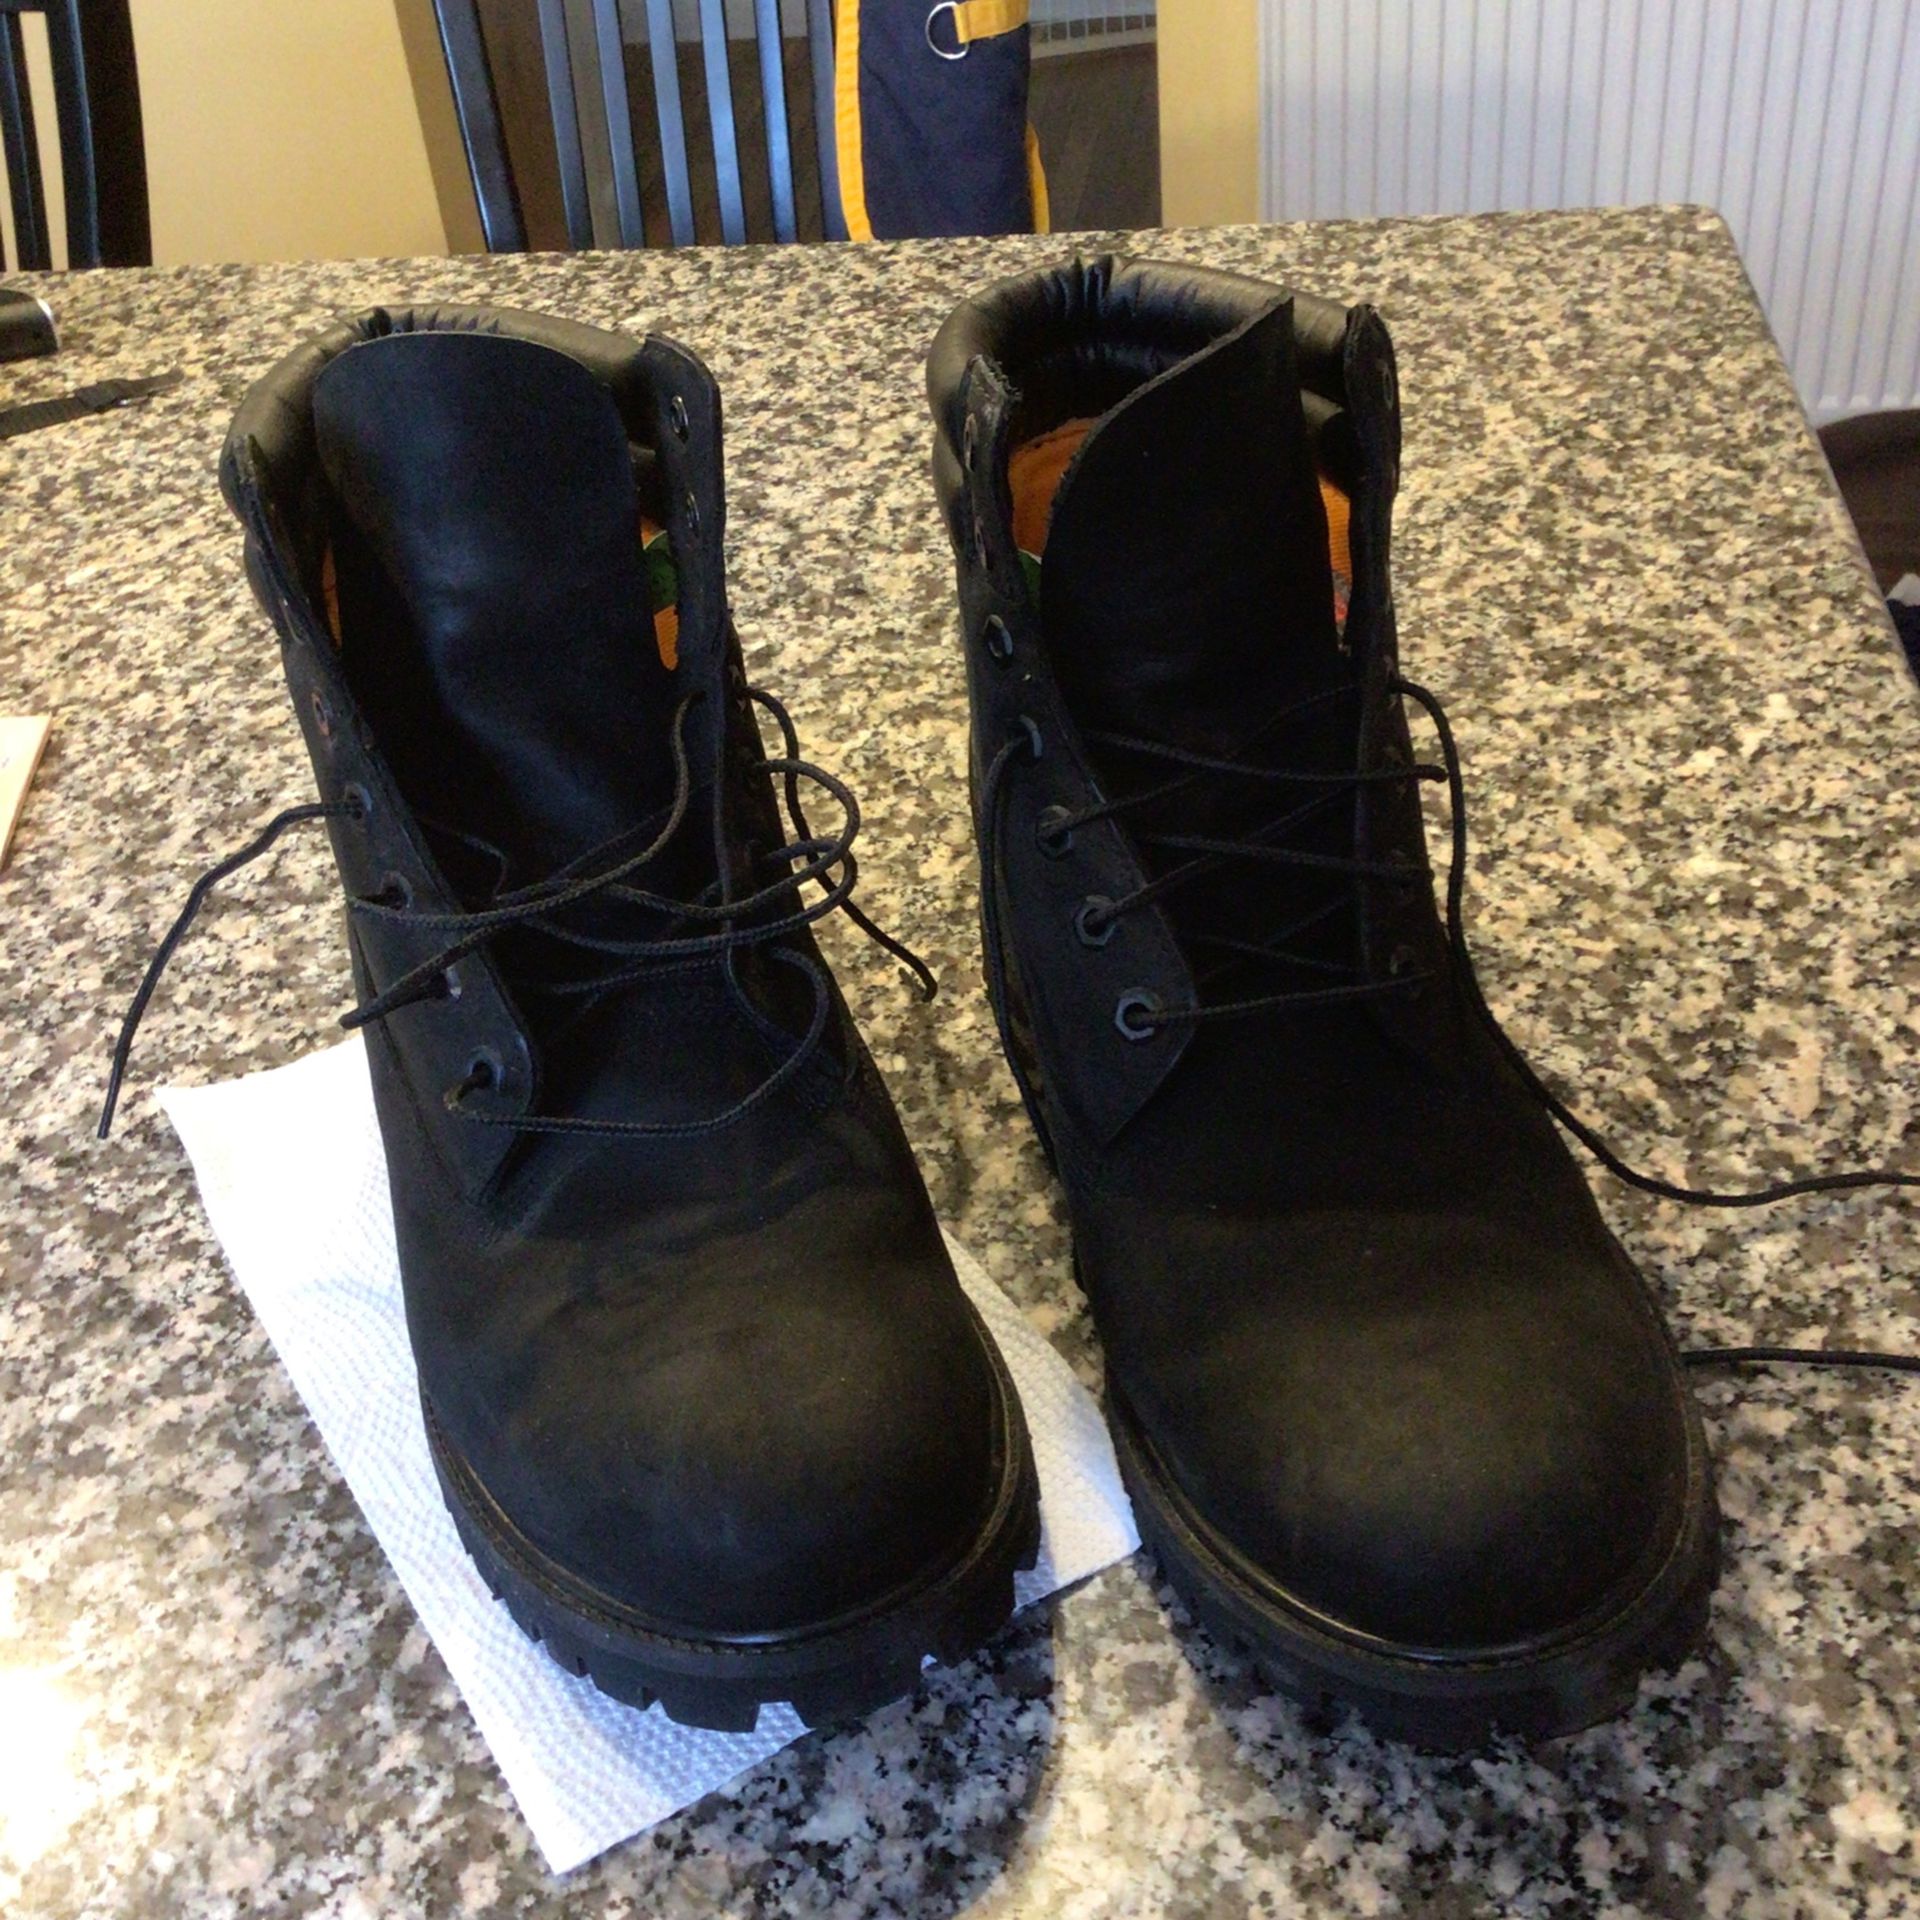 Like New Men’s Size 13 Black Timberland Boots